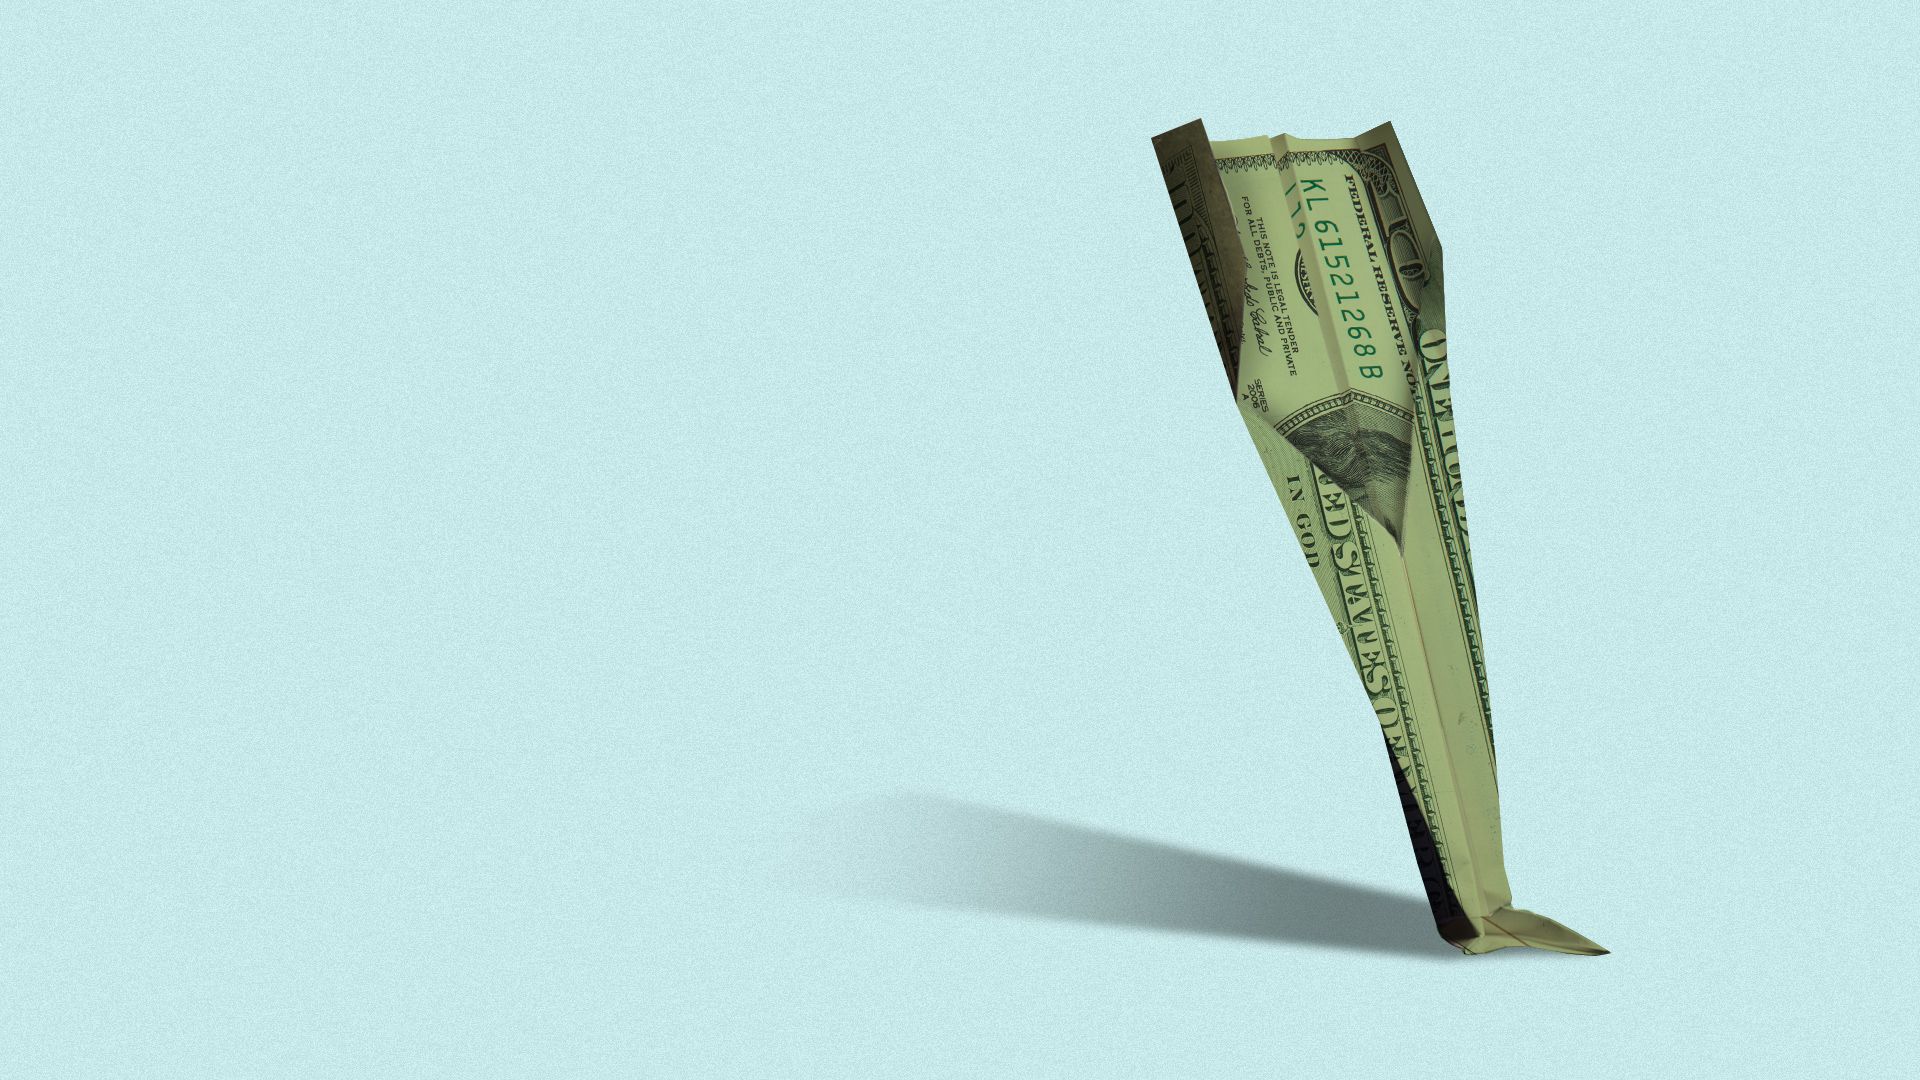 Illustration of a crashed paper plane made from a hundred dollar bill